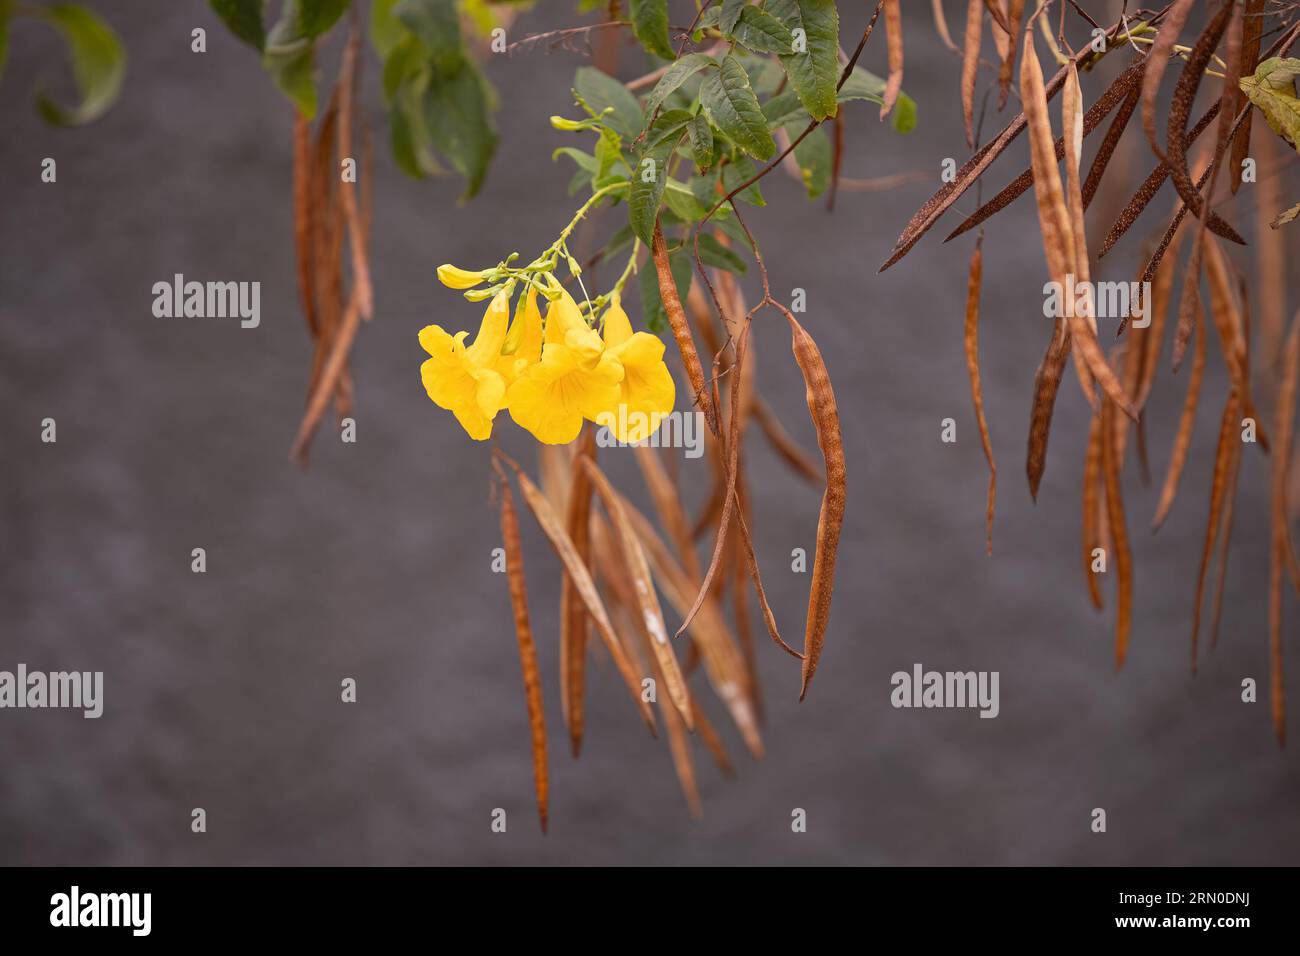 Yellow Trumpet Flower Tree of the species Tecoma stans Stock Photo